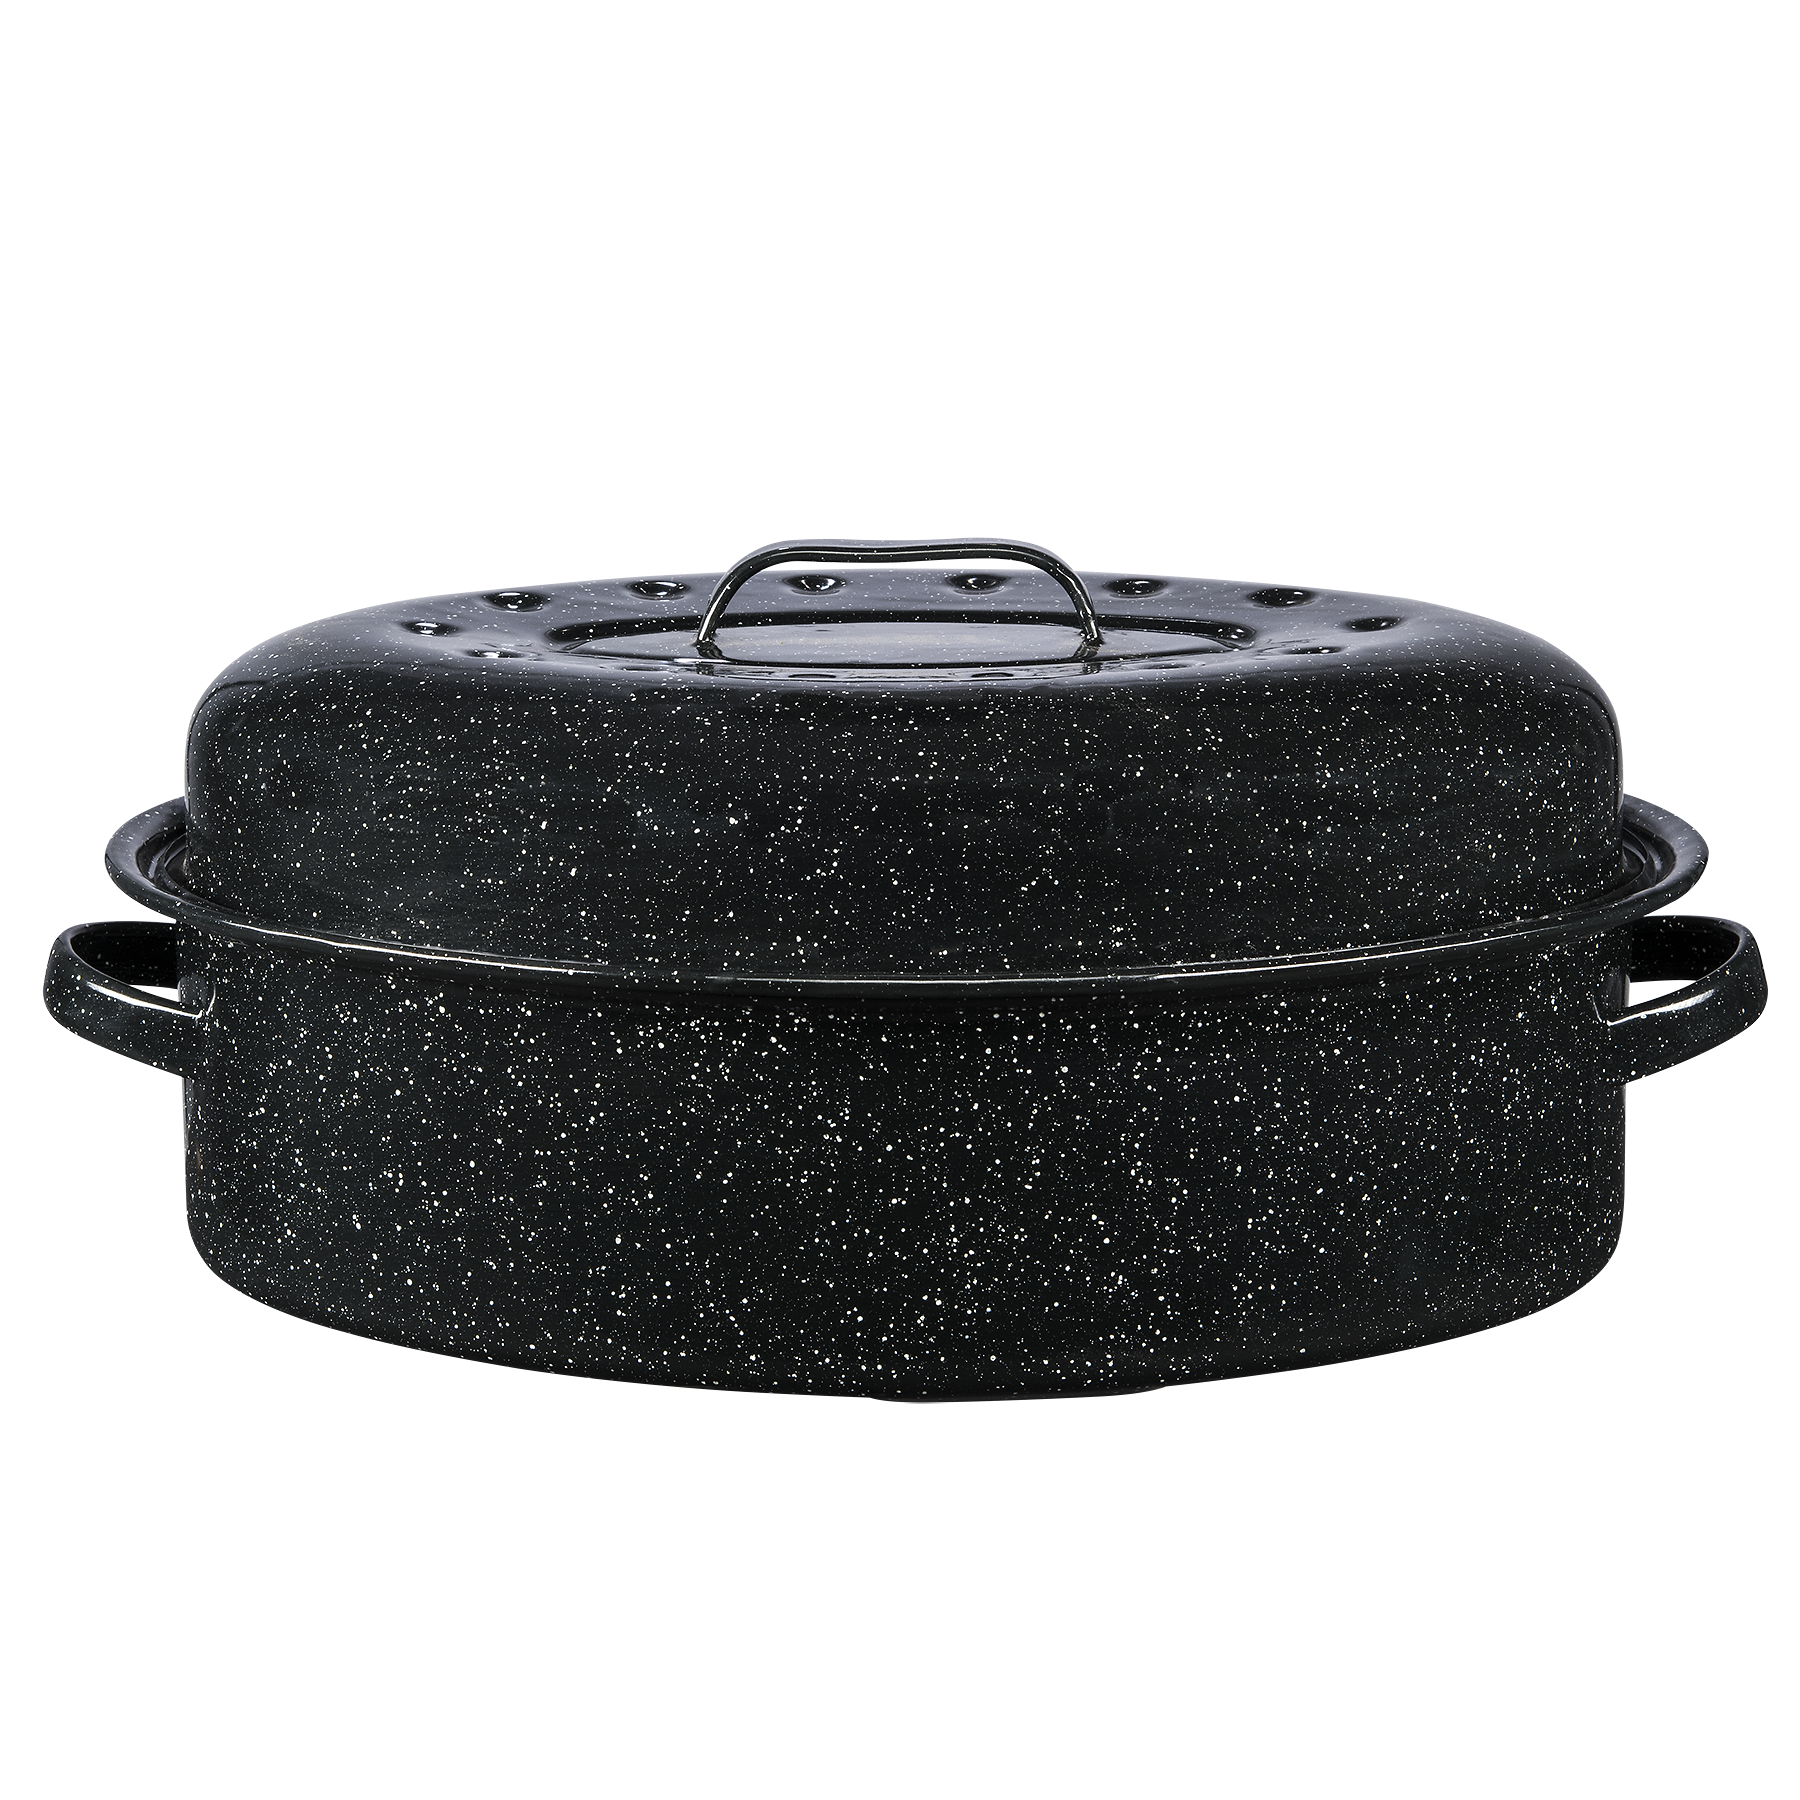 Granite Ware 18" Covered Oval Roaster, 15 Pound Capacity, Roasting Pan - image 1 of 5